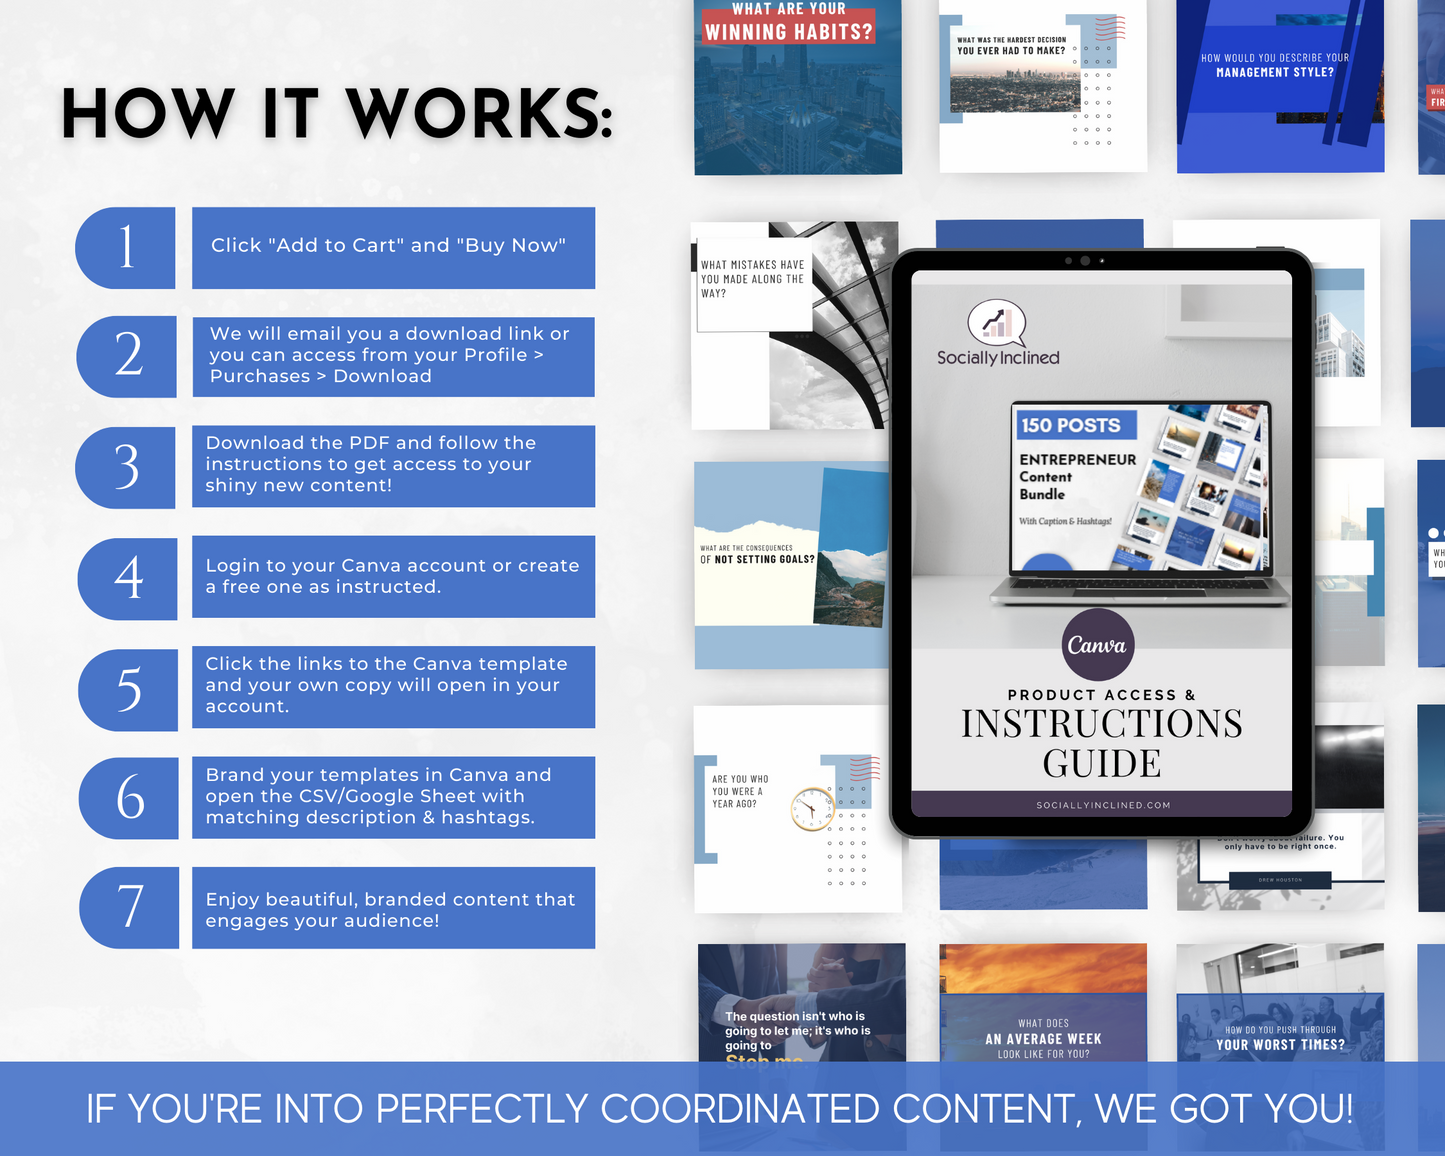 A guide providing instructions on how the Entrepreneur Socially Inclined Social Media Post Bundle with Canva Templates | 150 Images works for entrepreneurs.